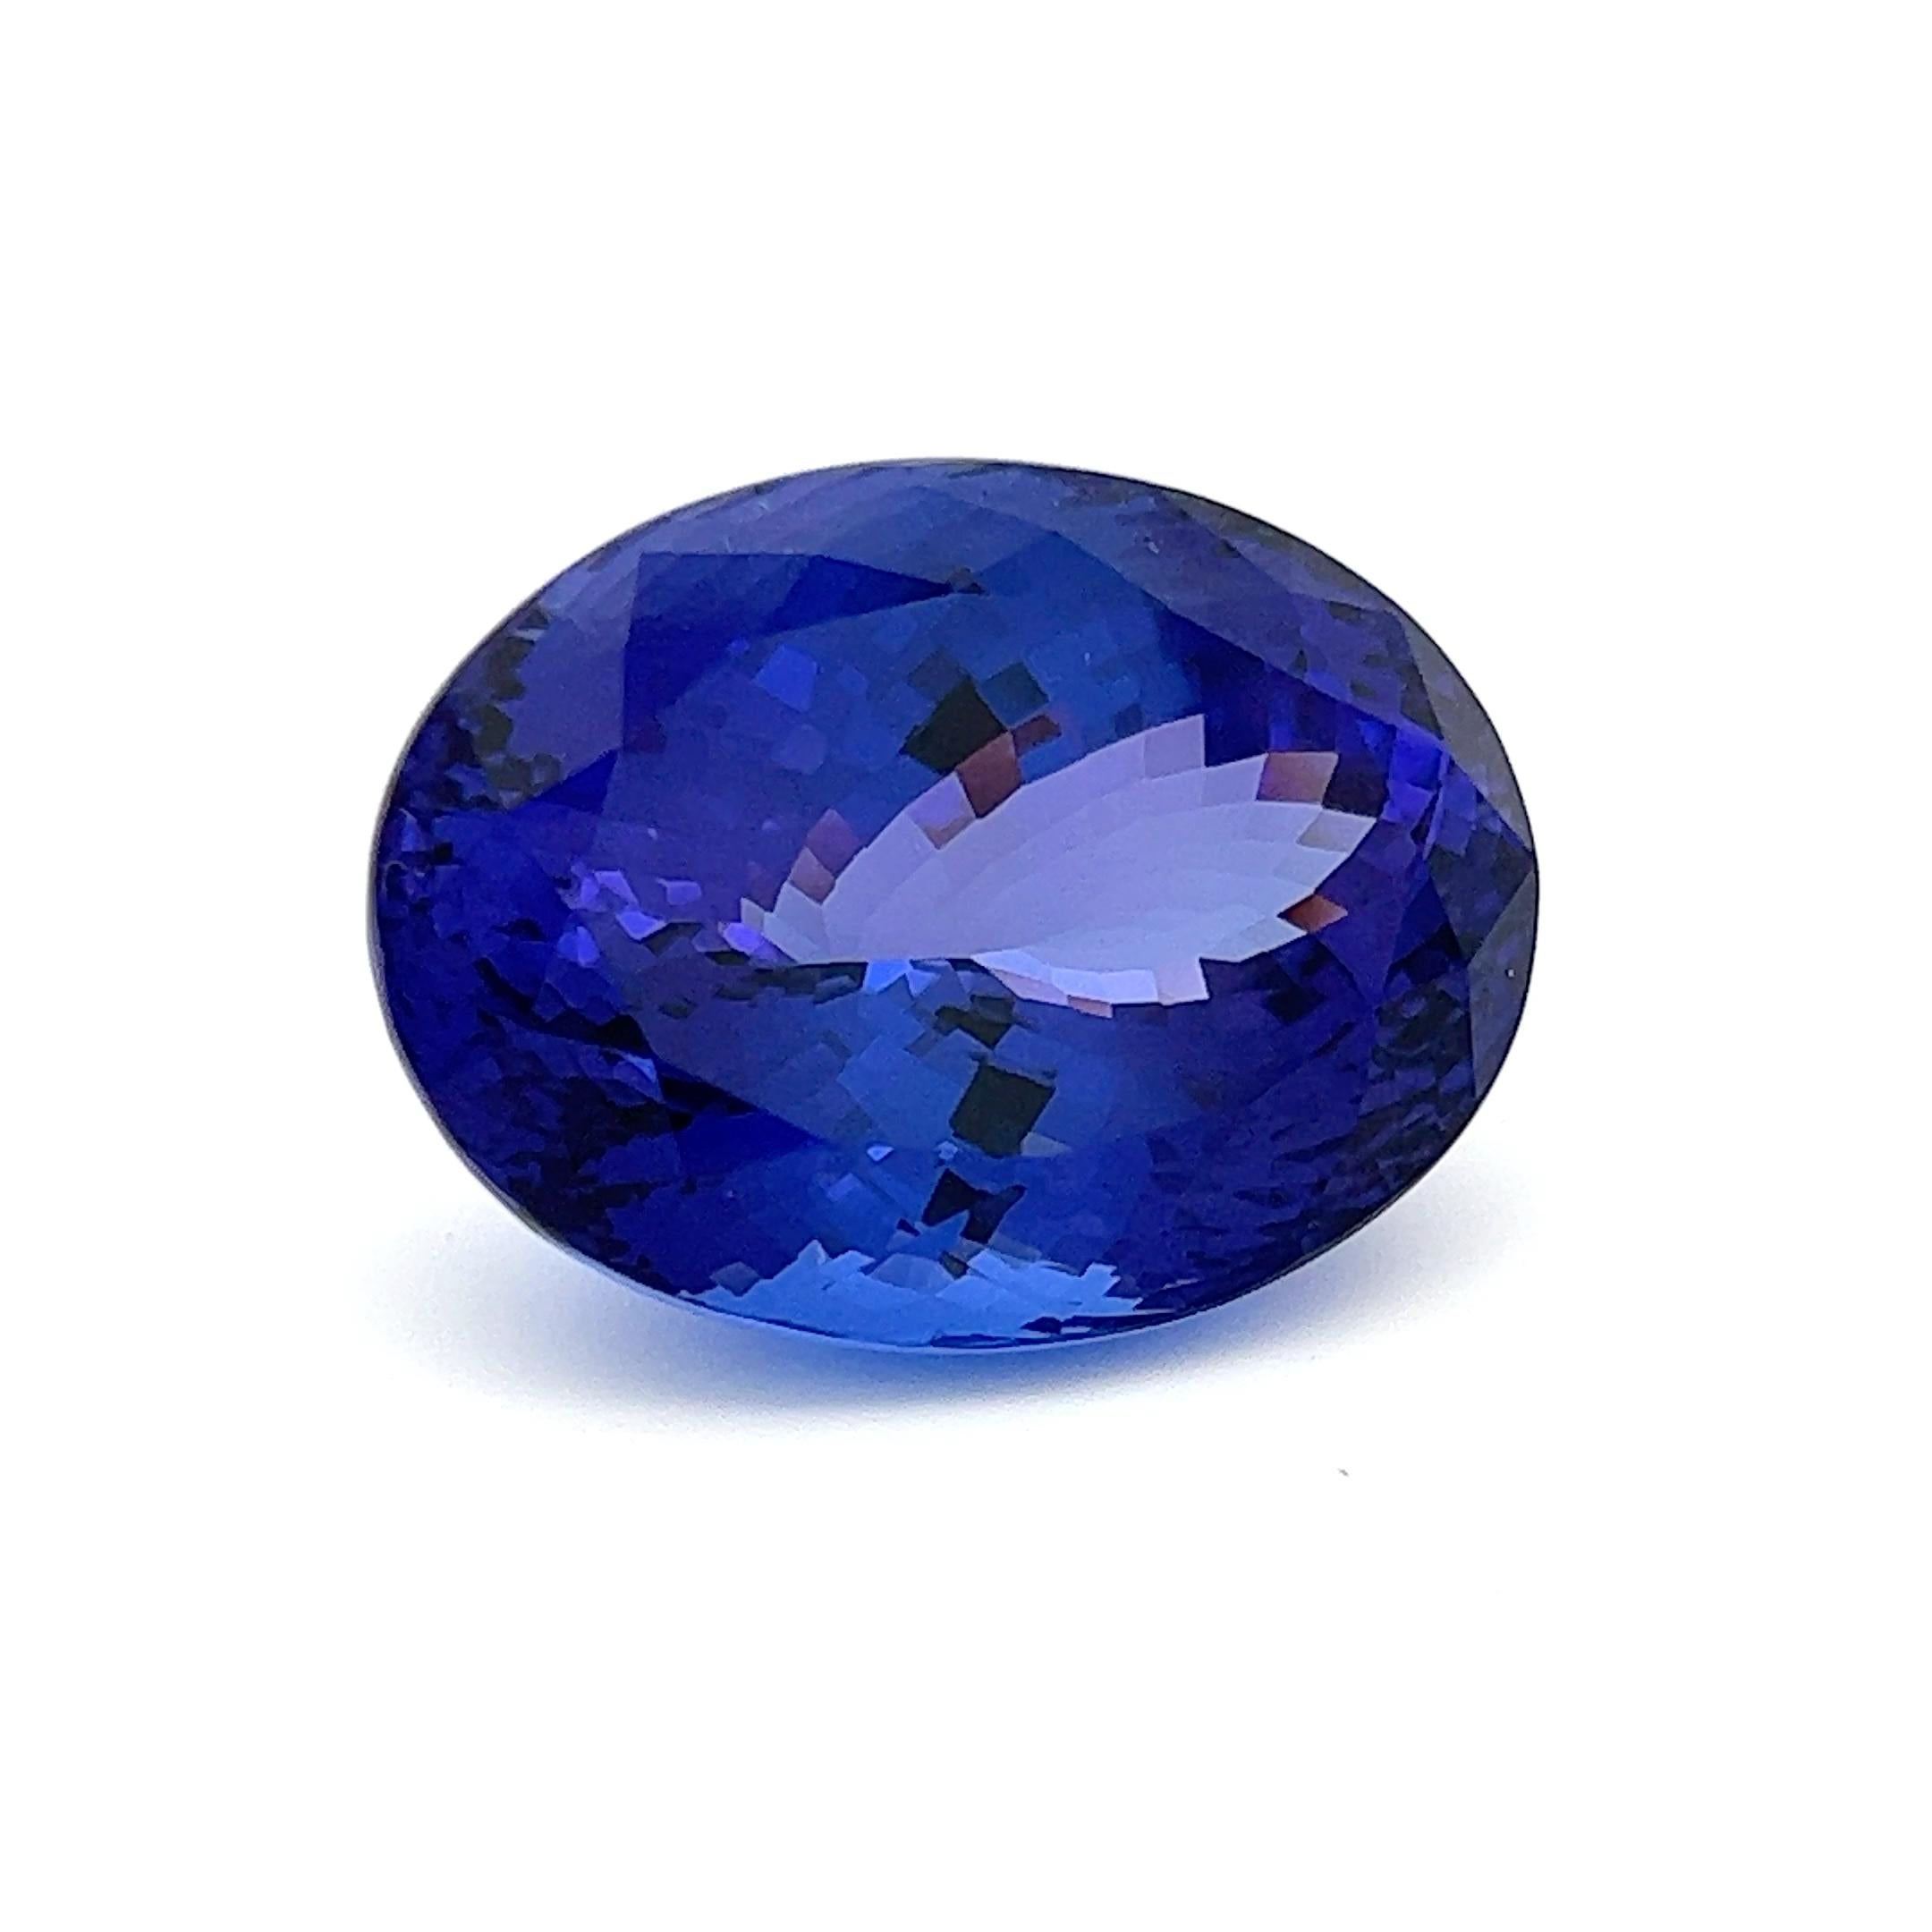 Introducing the breathtaking 111.55 carat loose Tanzanite, a rare and extraordinary gemstone of the highest quality. This oval-shaped Tanzanite boasts an exceptional AAAA rating, indicating the finest color, clarity, and brilliance that can be found